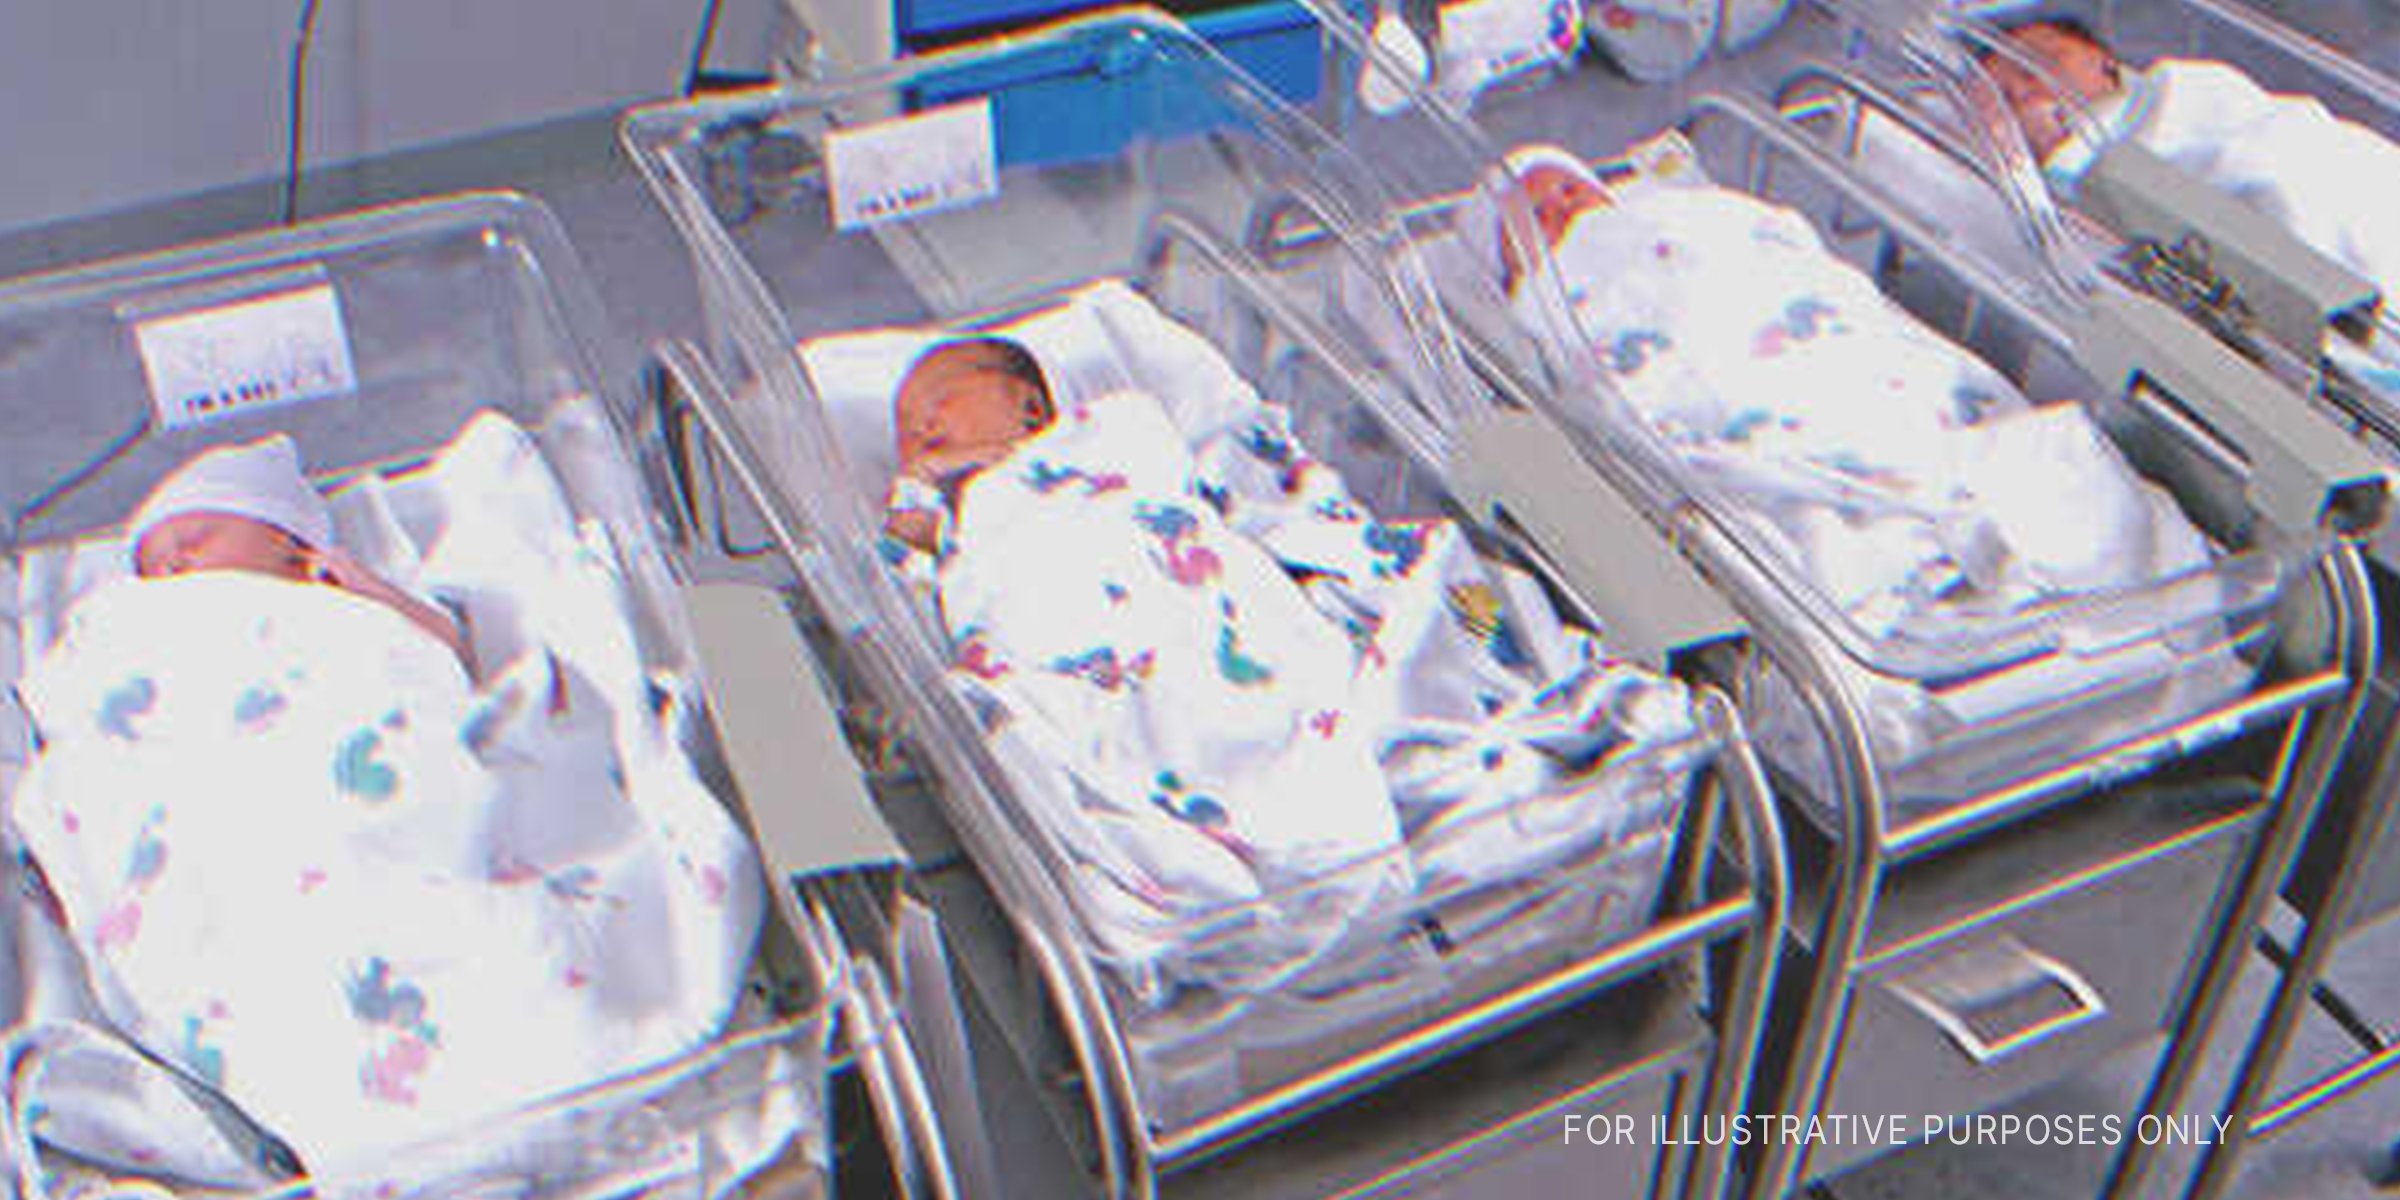 Babies in a hospital | Source: Getty Images